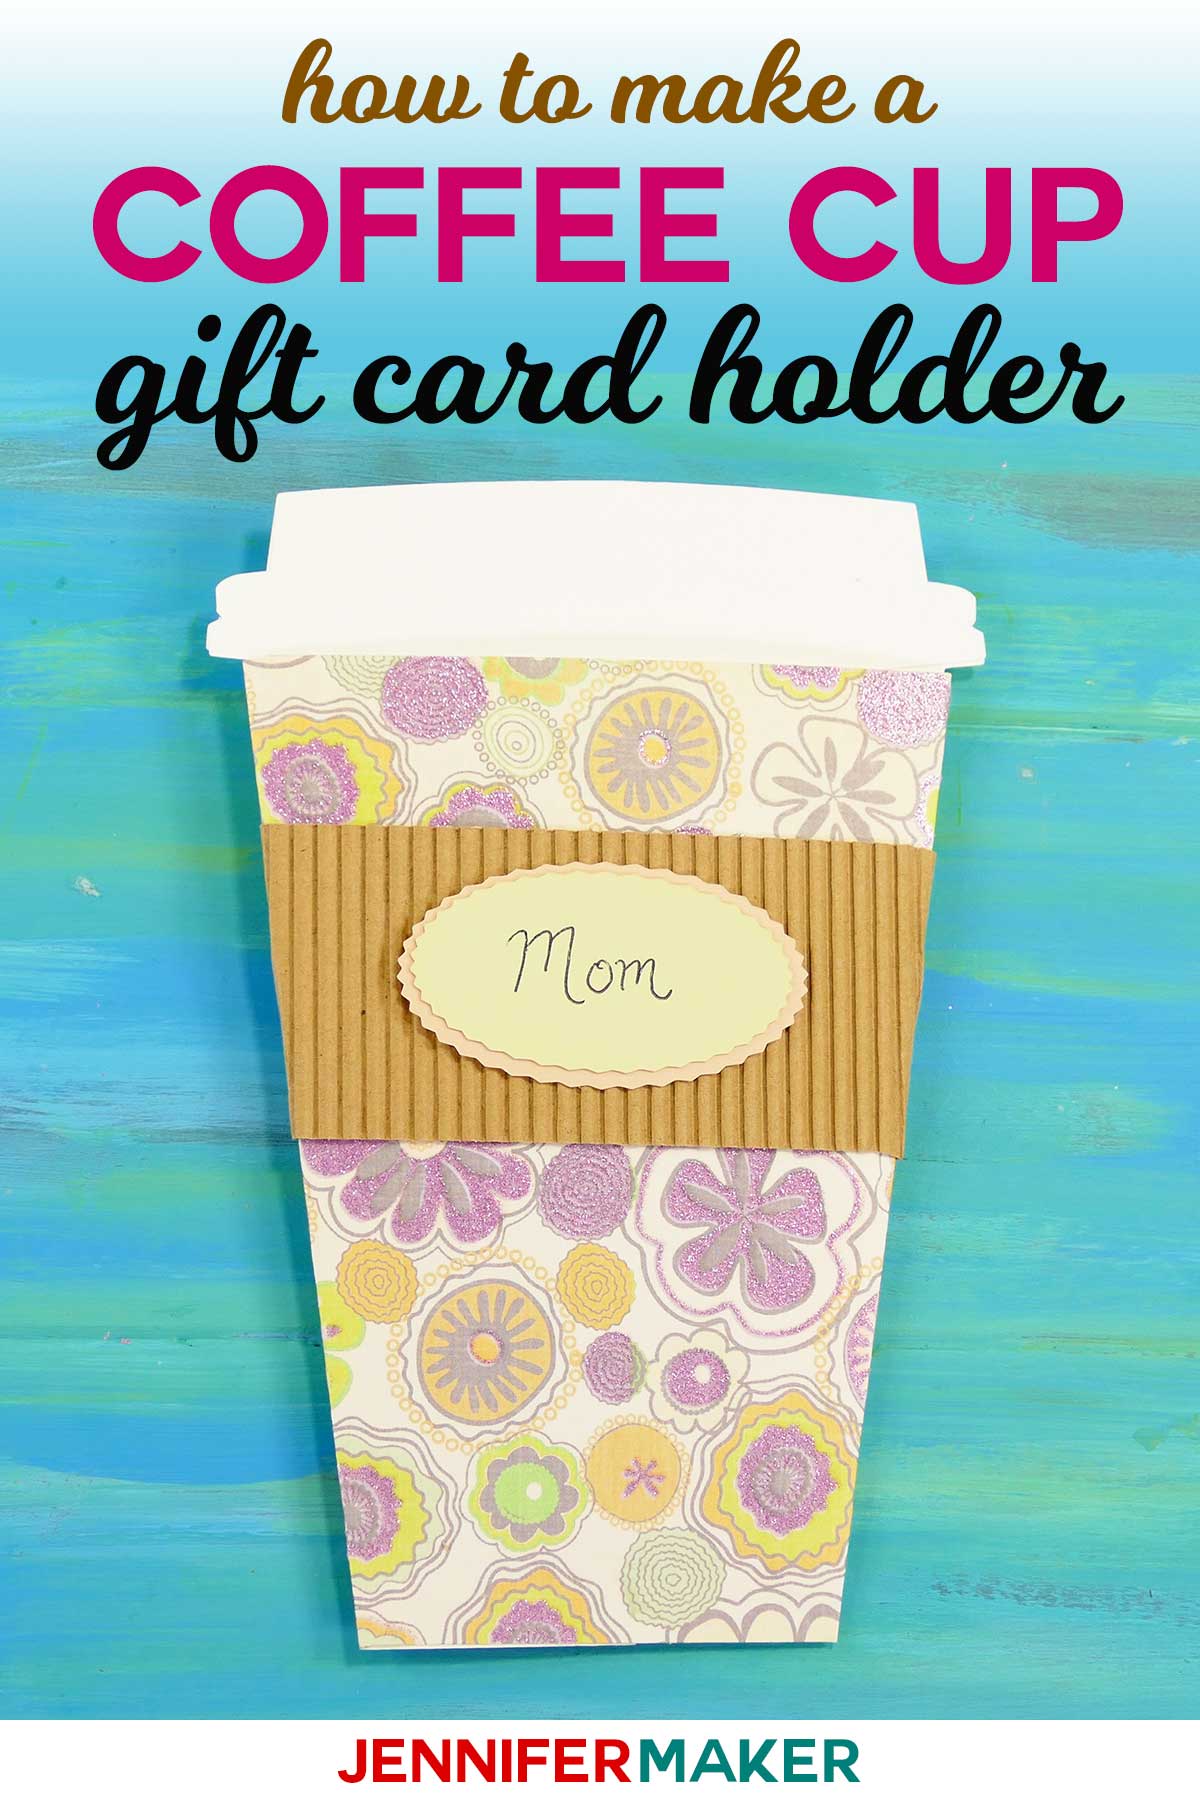 Download Take-Out Coffee Cup Gift Card Holder - Jennifer Maker